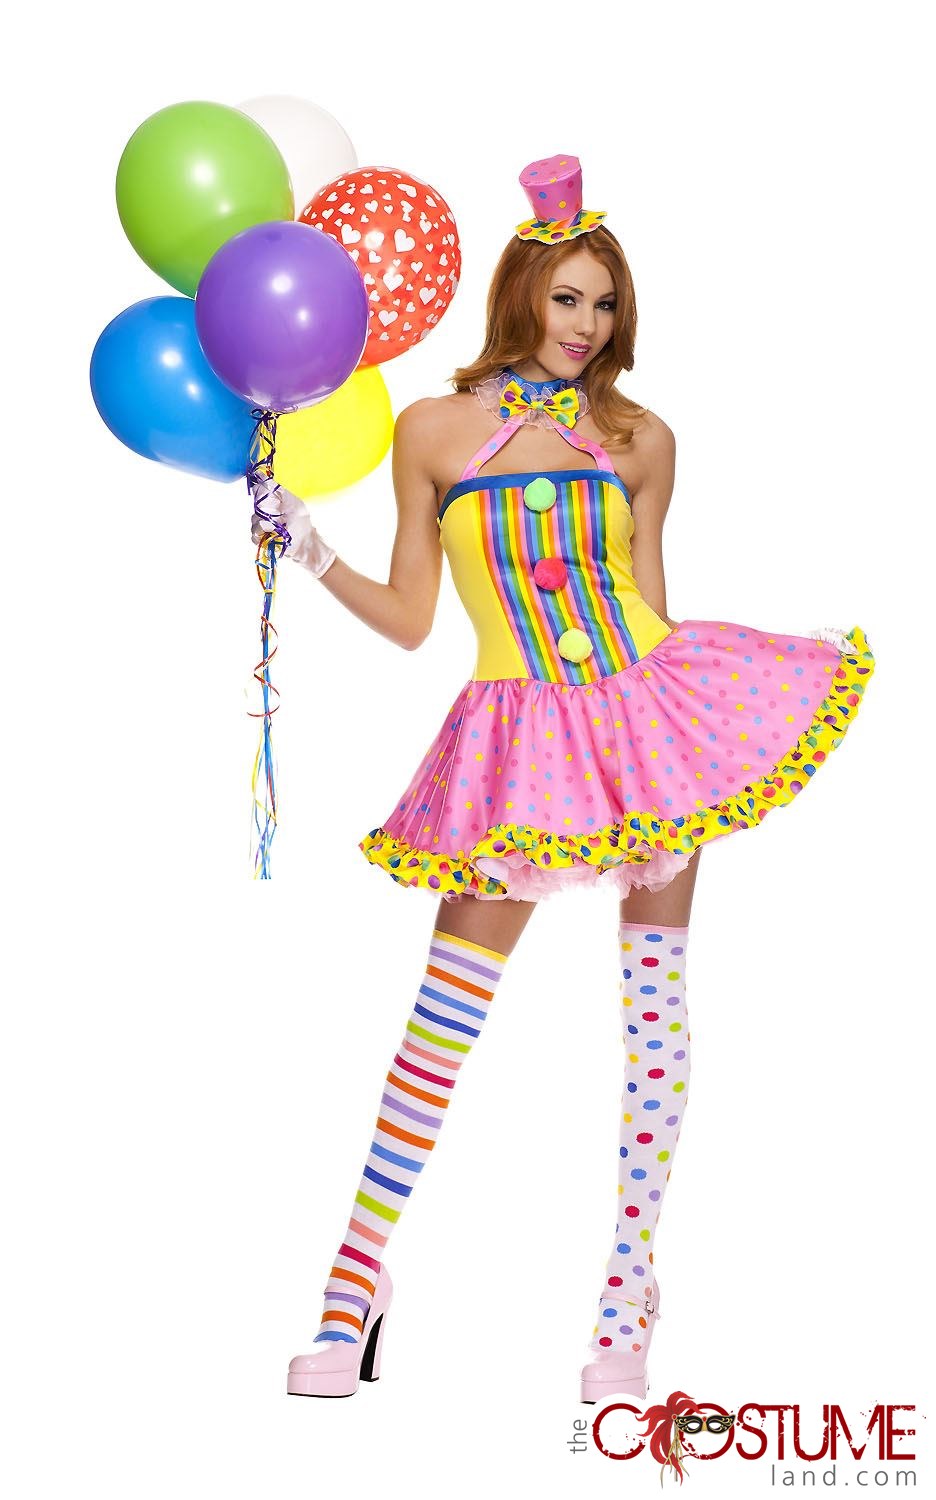 Circus Cutie Women Costume Adult Clown Outfit Ladies Halloween Cosplay Dress Up Ebay 6423